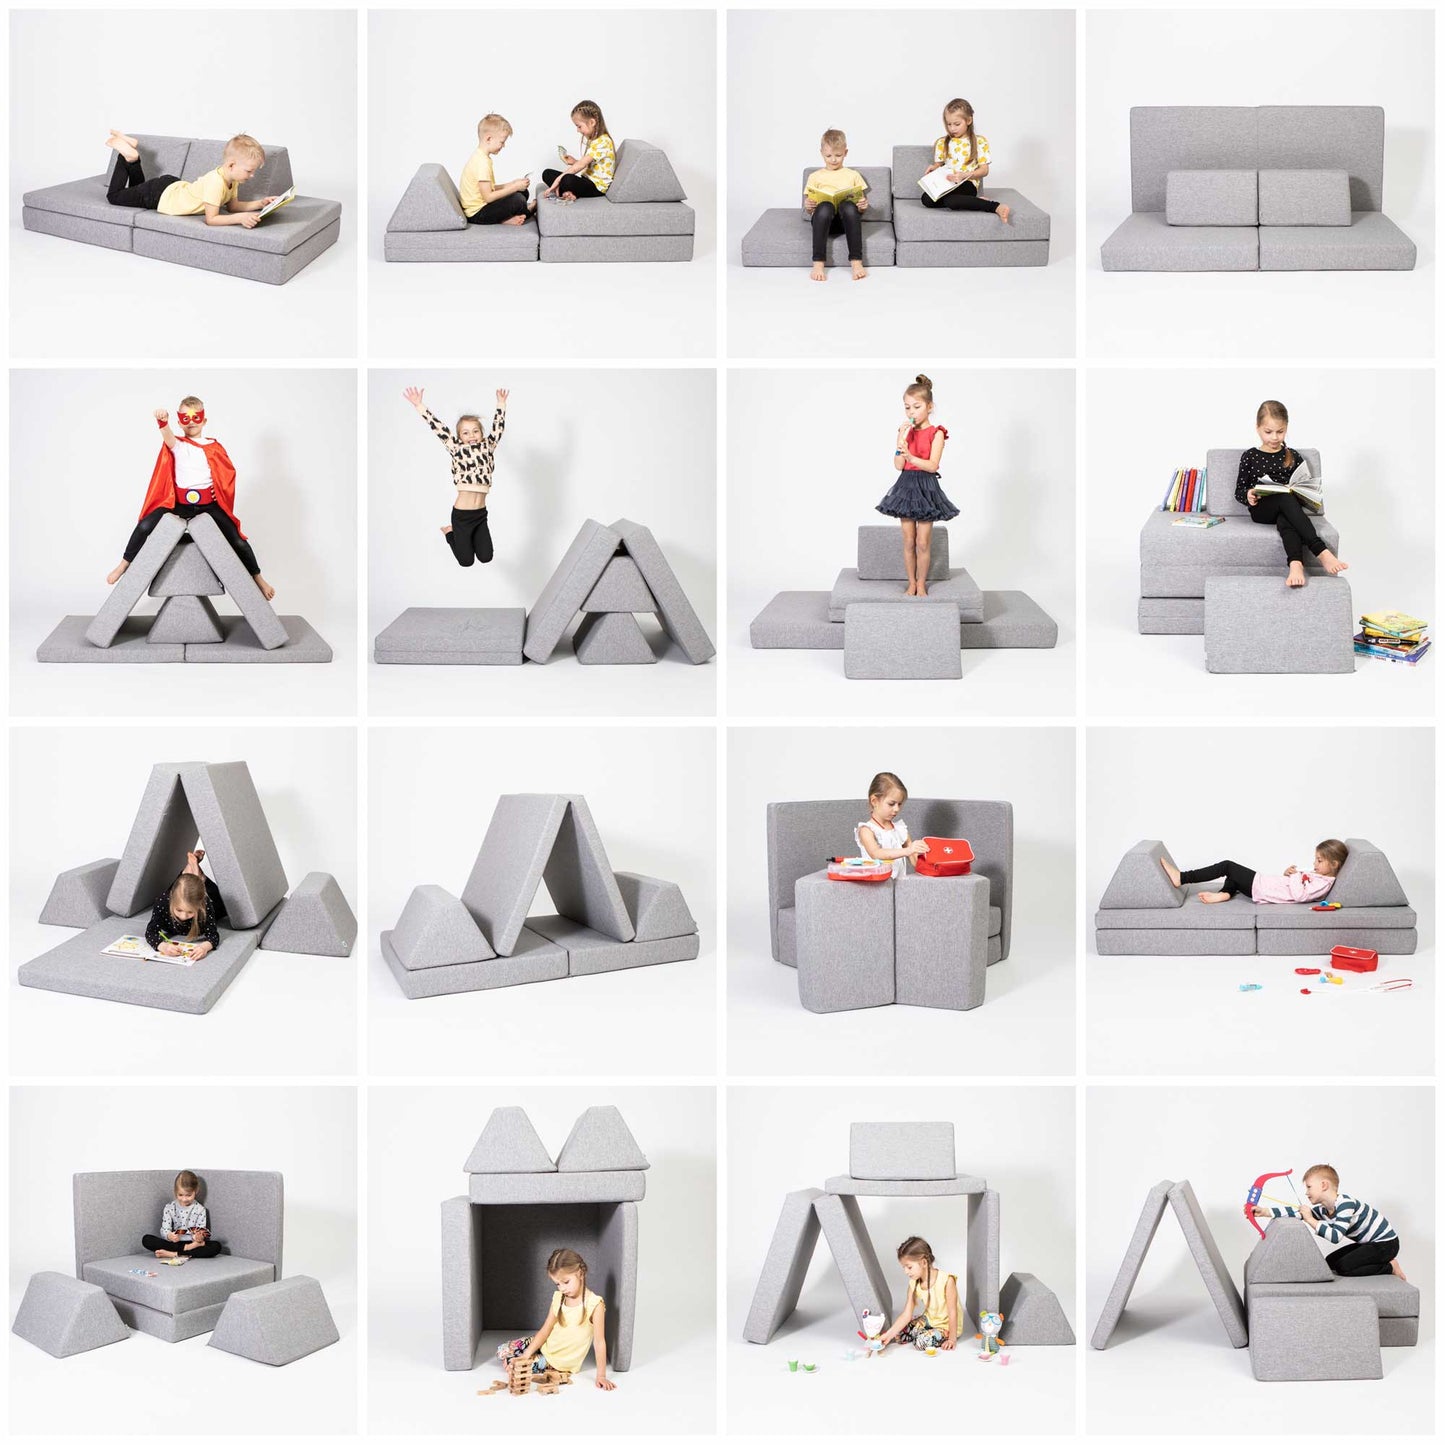 16 shape ideas for the grey Monboxy activity couch